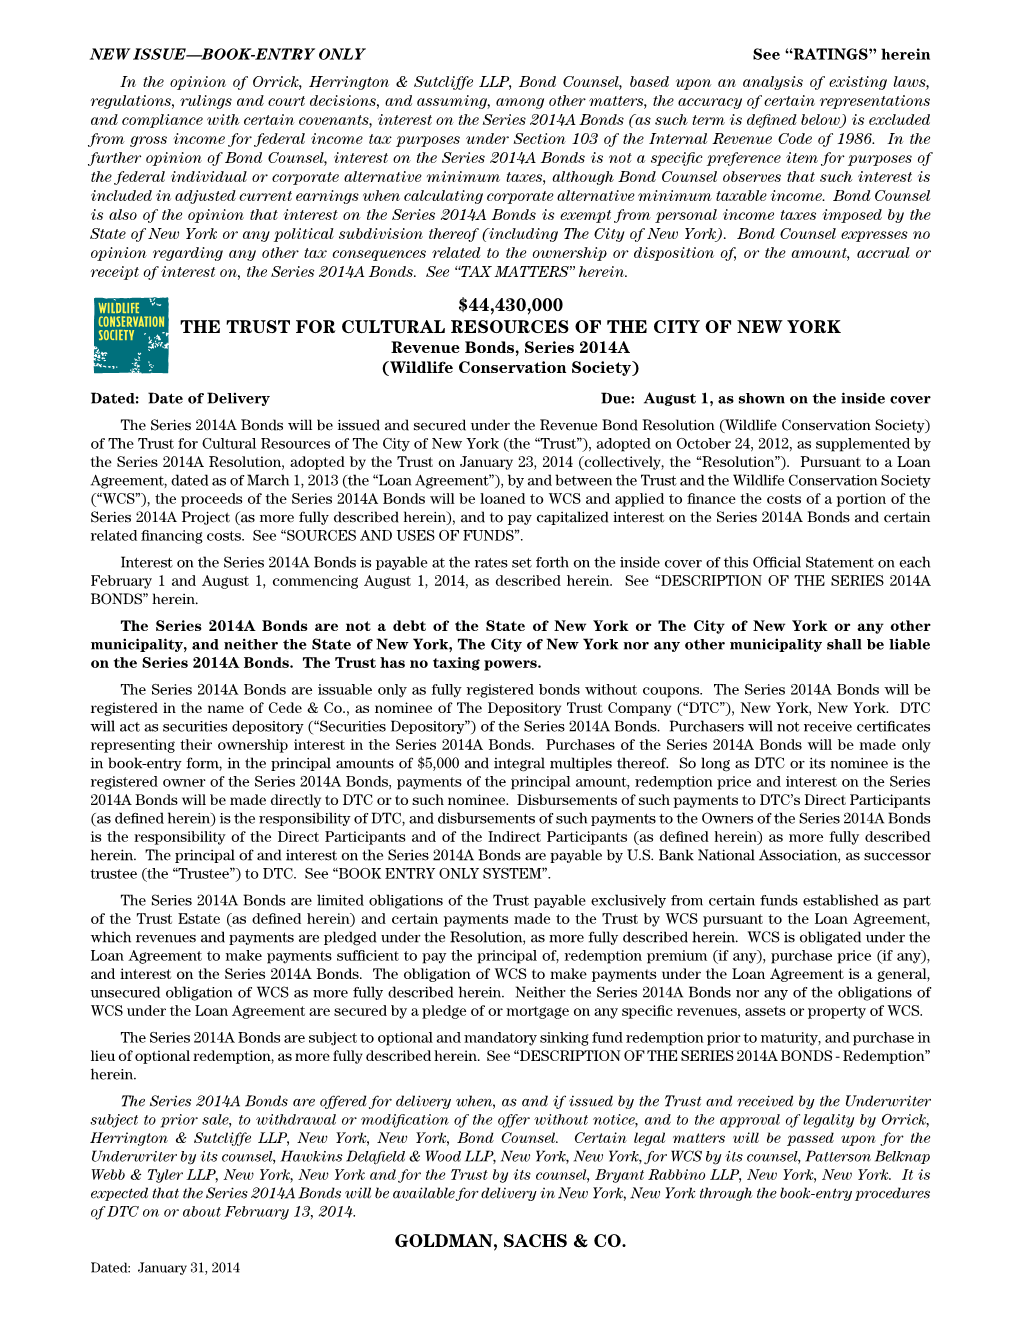 The Trust for Cultural Resources of the City of New York